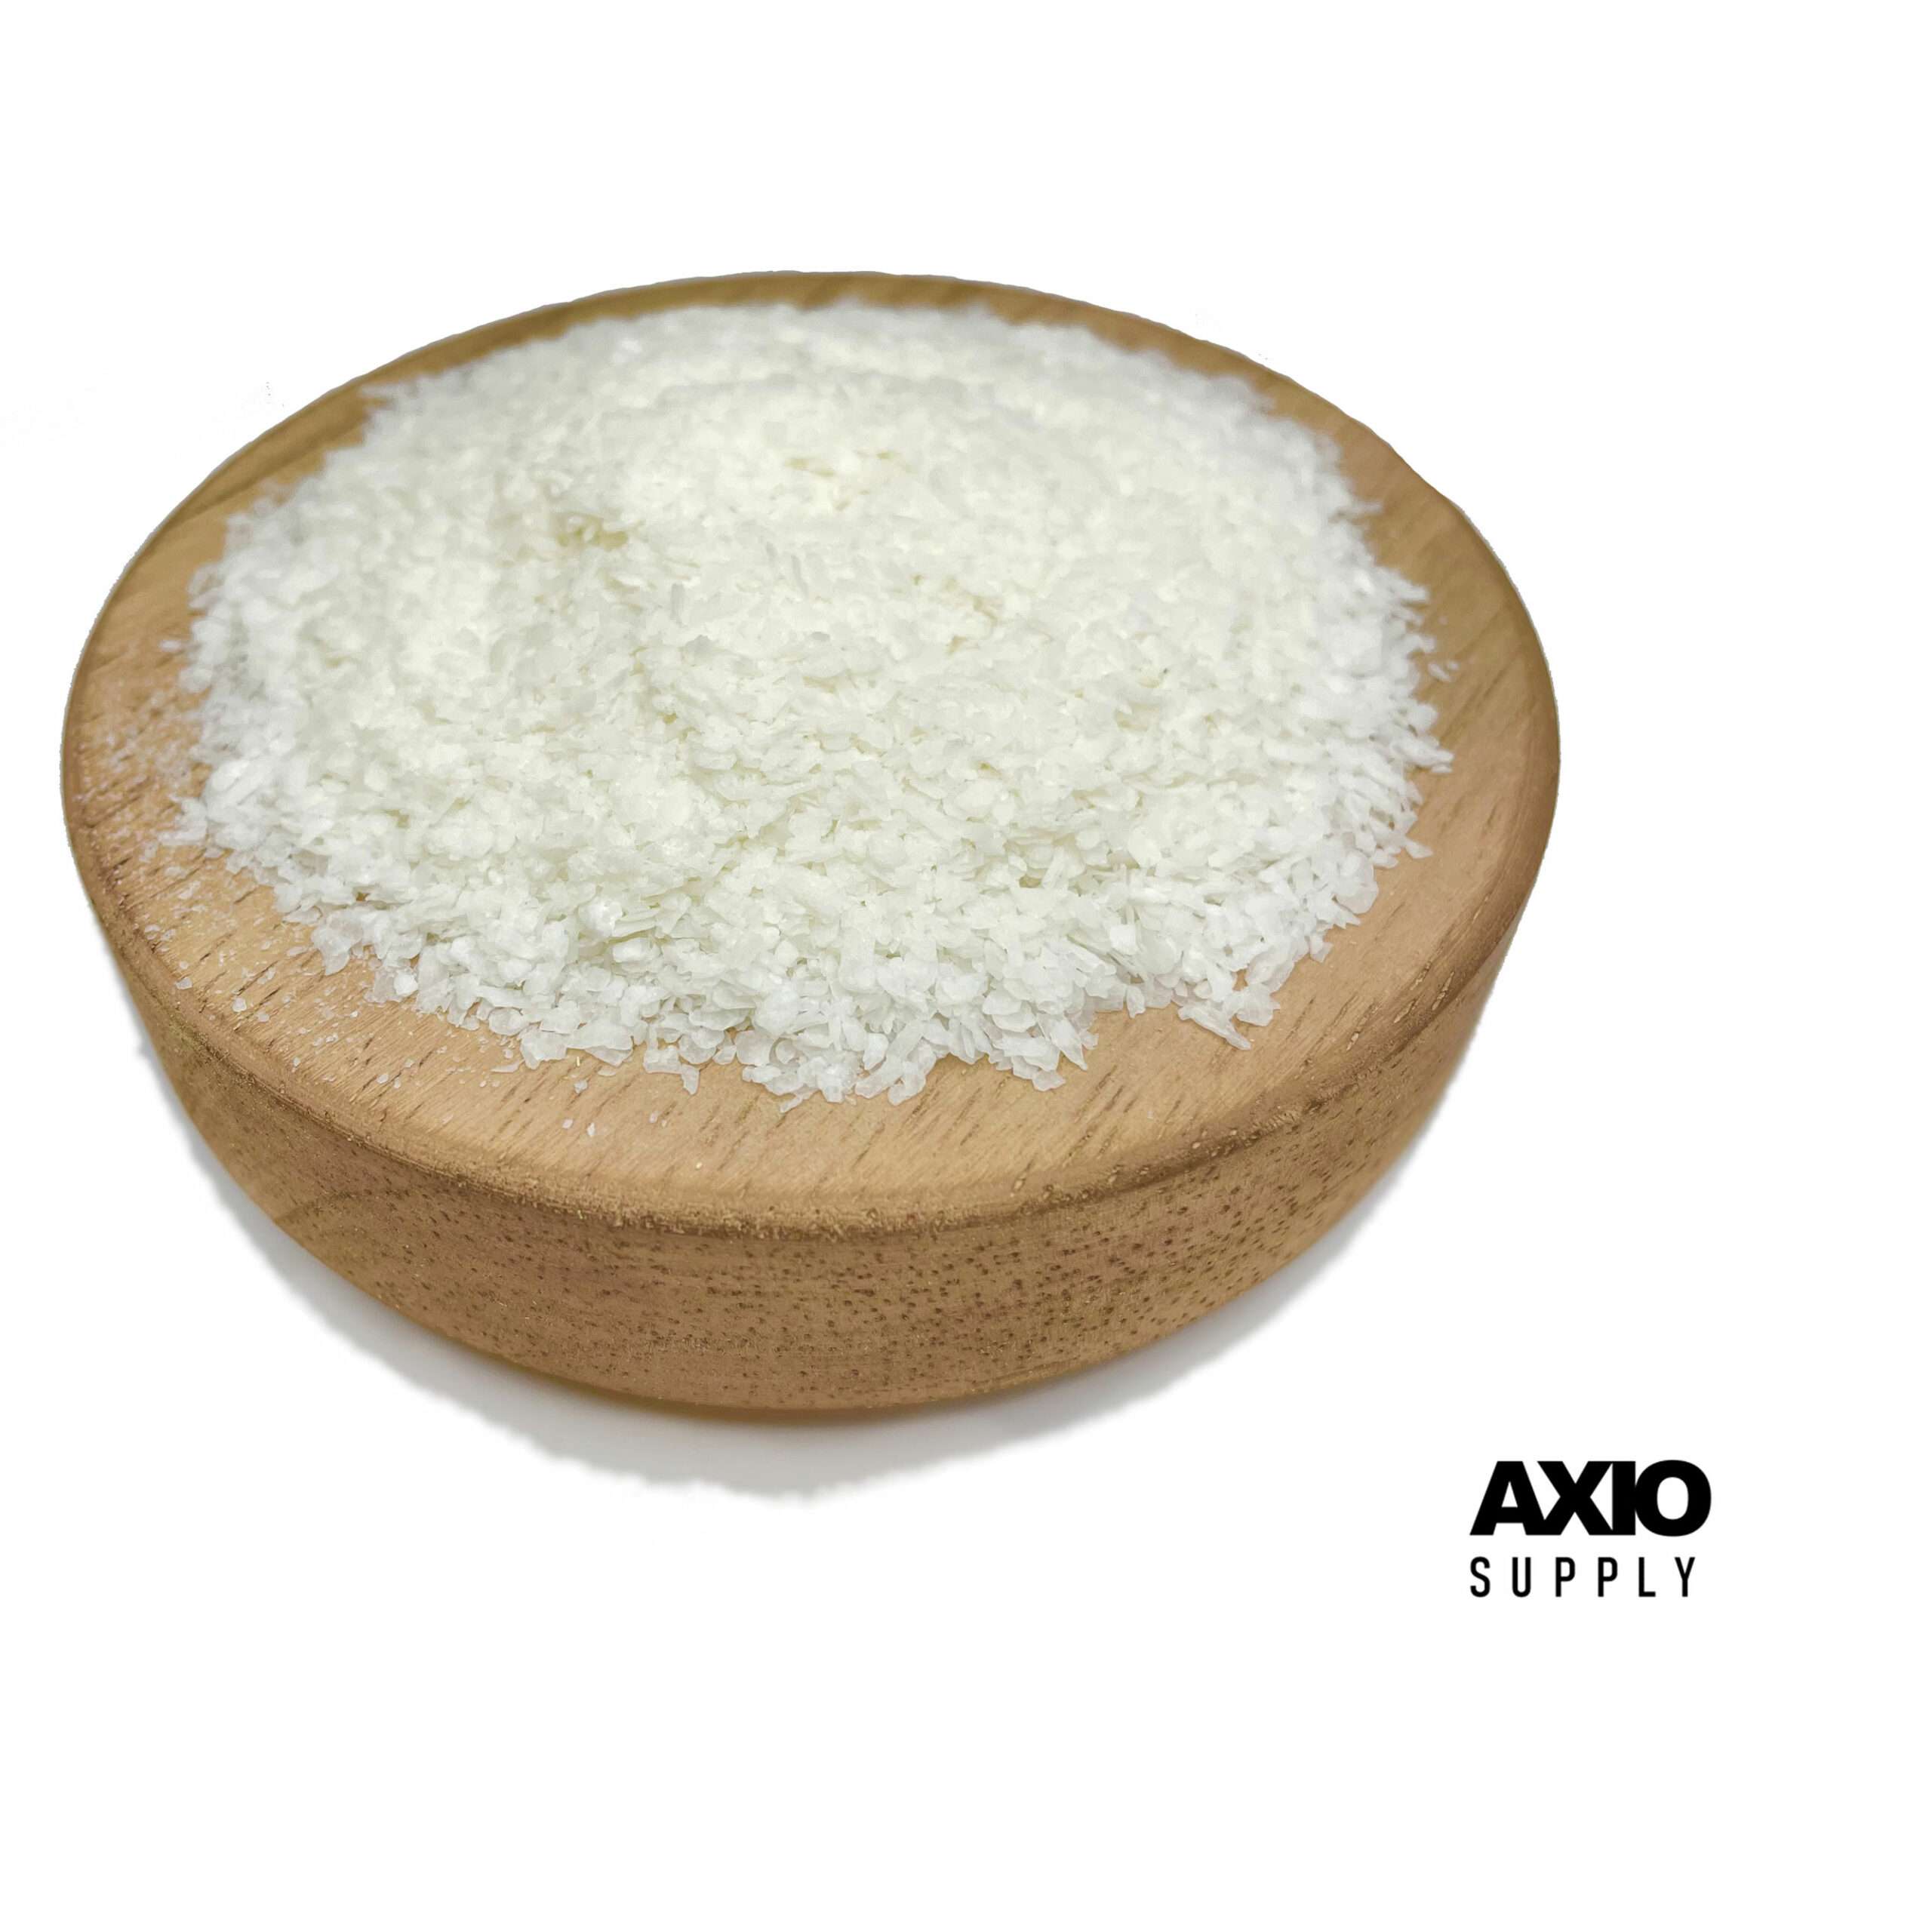 https://www.axiosupply.com/wp-content/uploads/2023/04/110726-%C2%B7-SOAP-FLAKES-40LBS-Axio-scaled-1.jpg